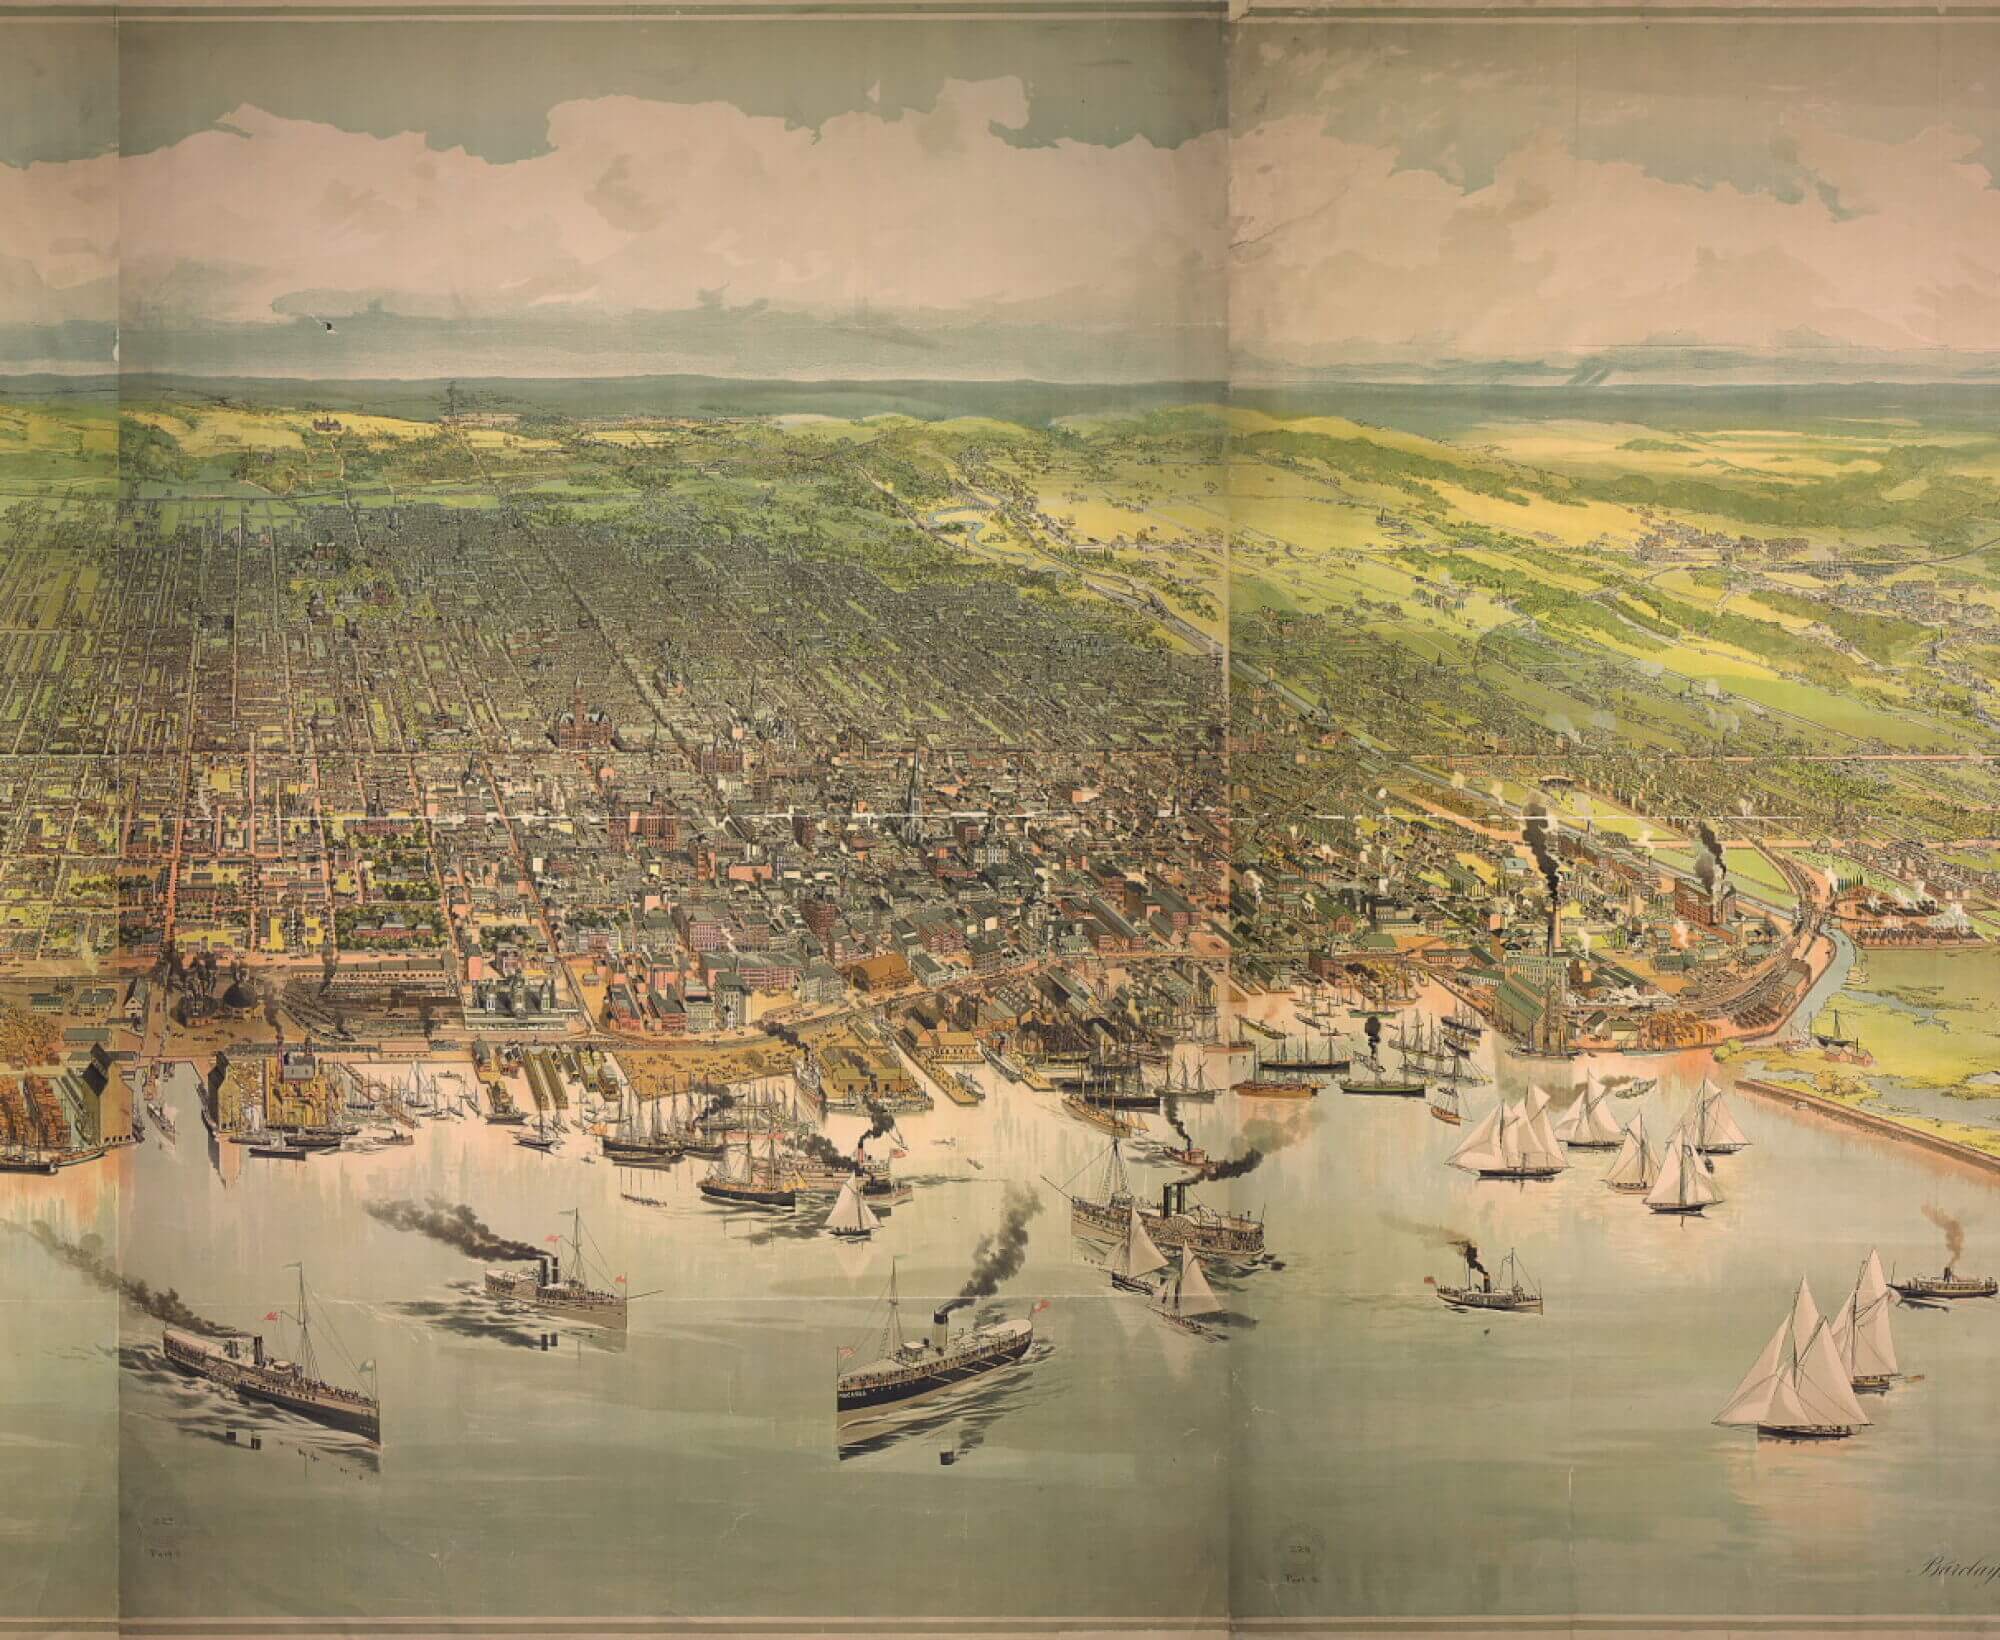 Coloured, painted illustration of the Toronto harbour and surrounding landscape. In the foreground is blue water with many boats on it, and in the distance is greenery. The sky is blue with many clouds.